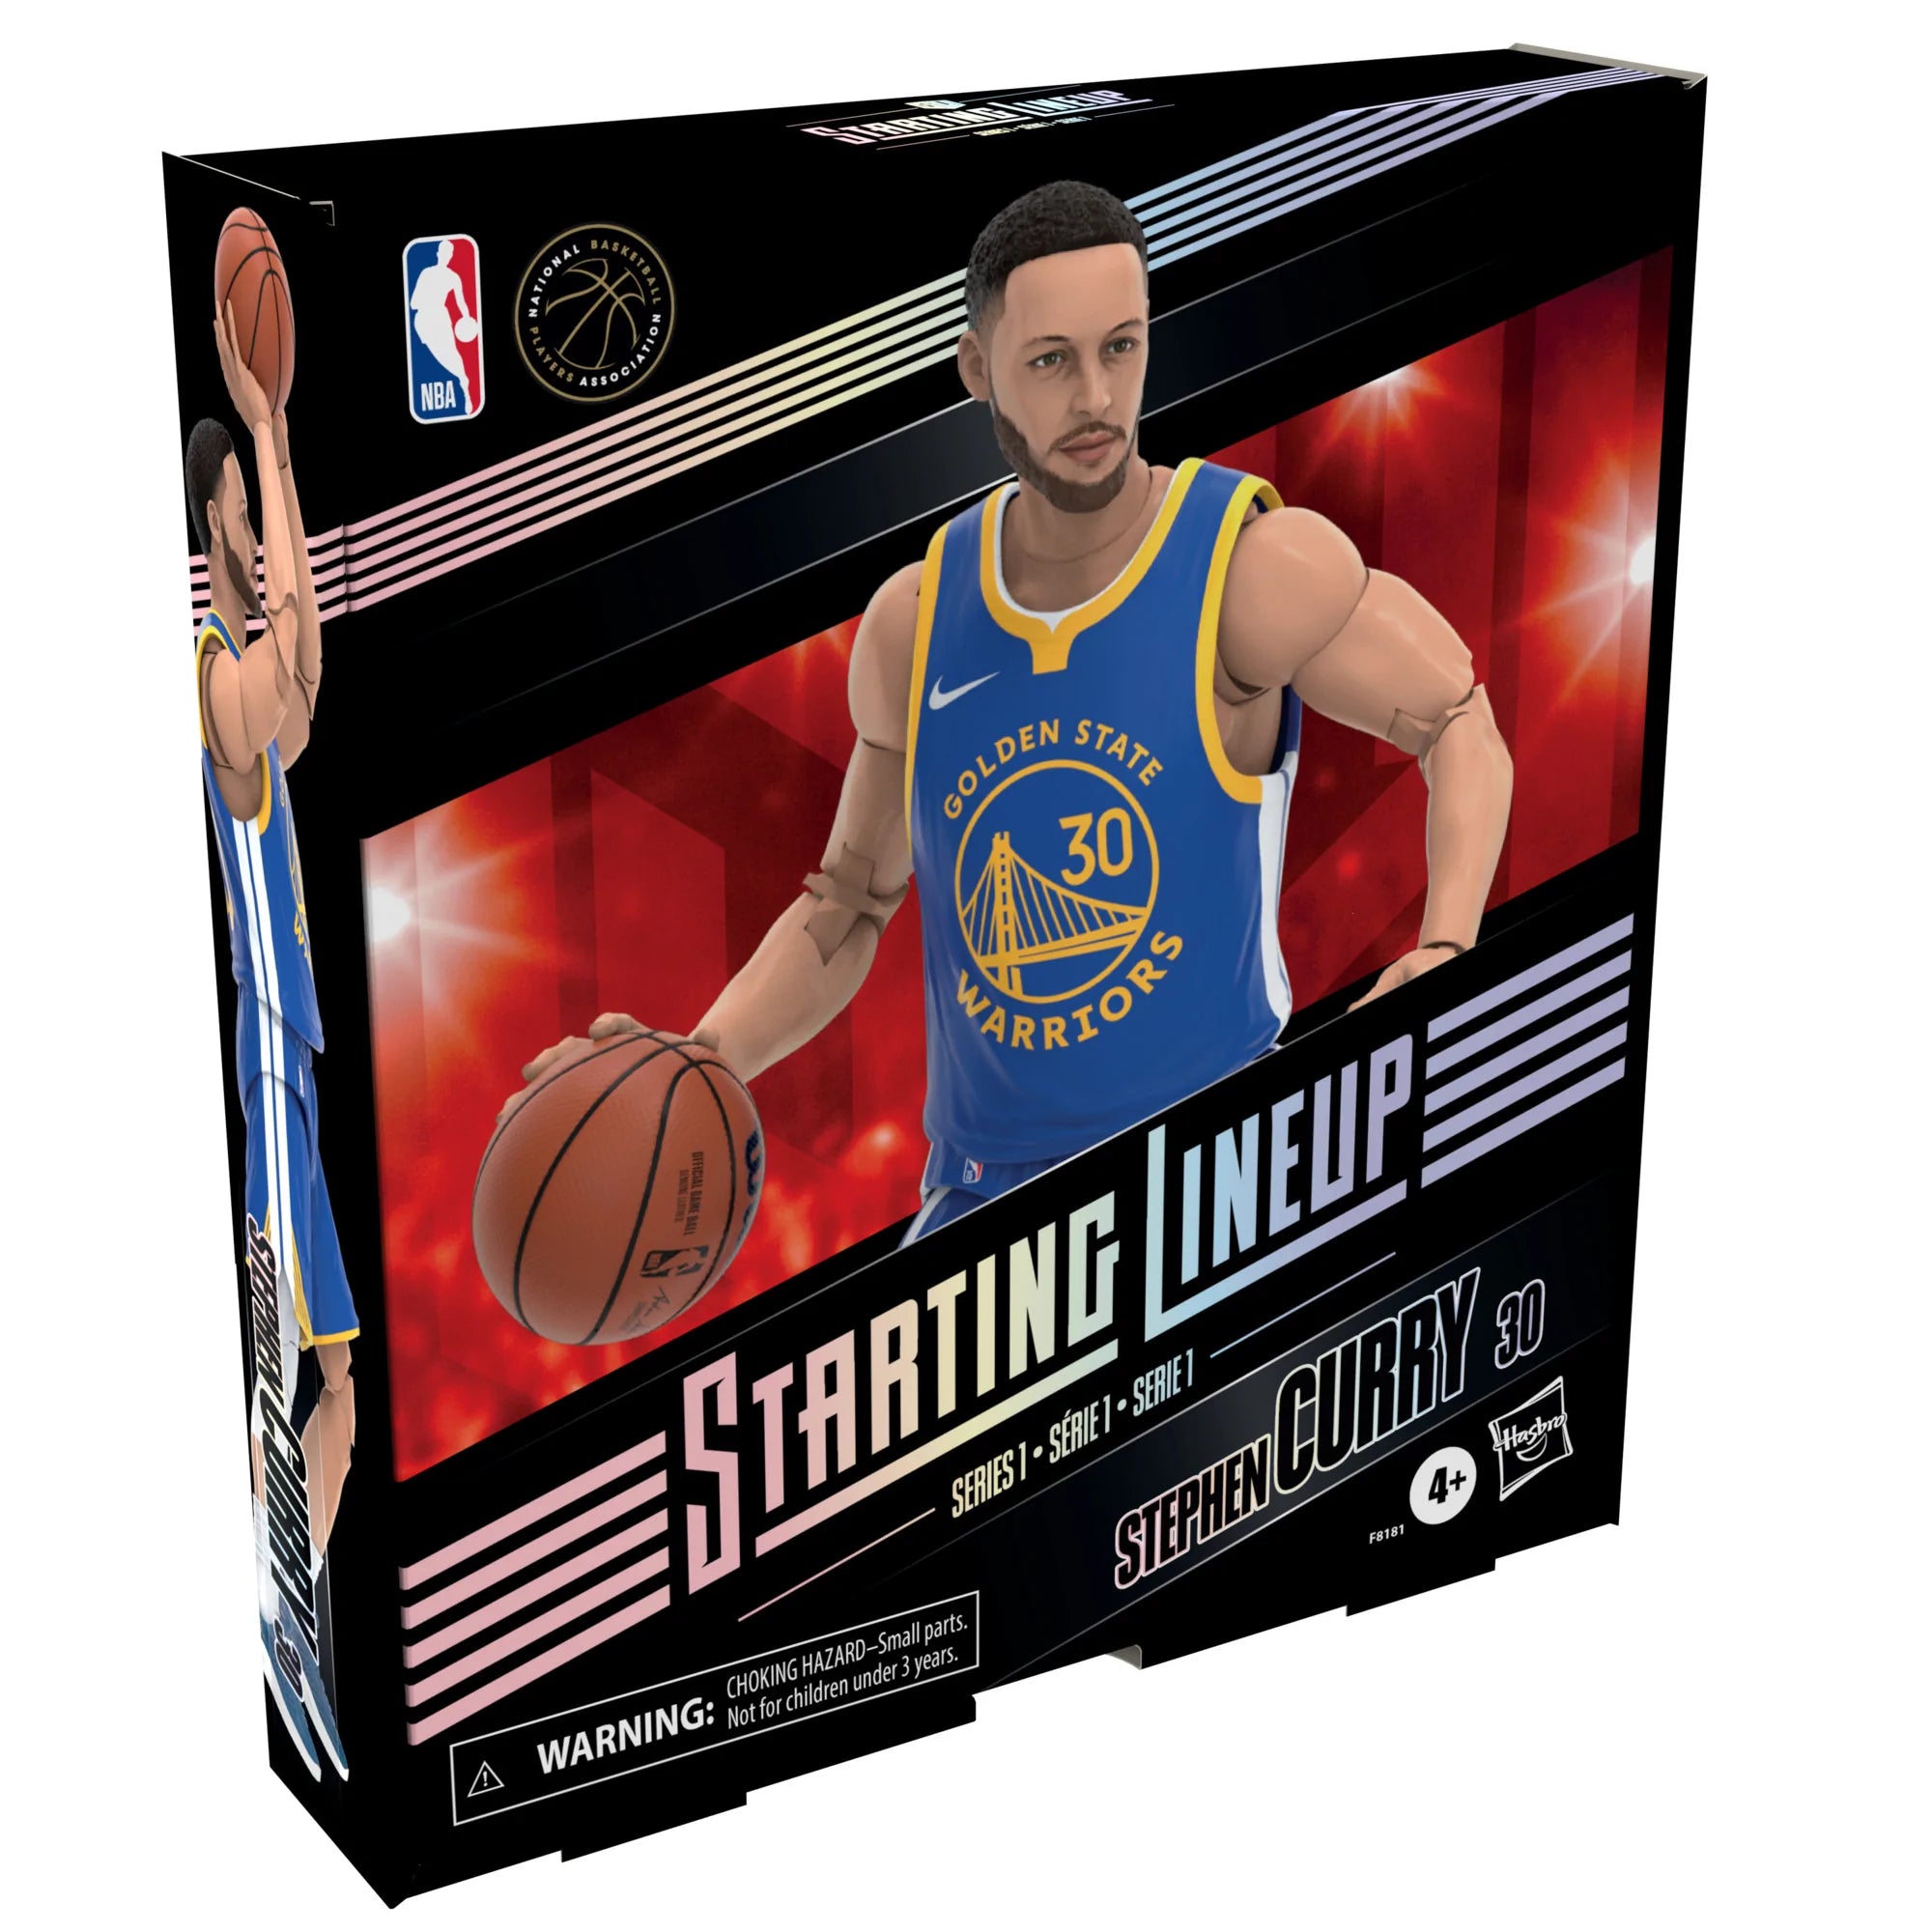 Hasbro - Starting Lineup Series 1 - NBA - Stephen Curry - Marvelous Toys